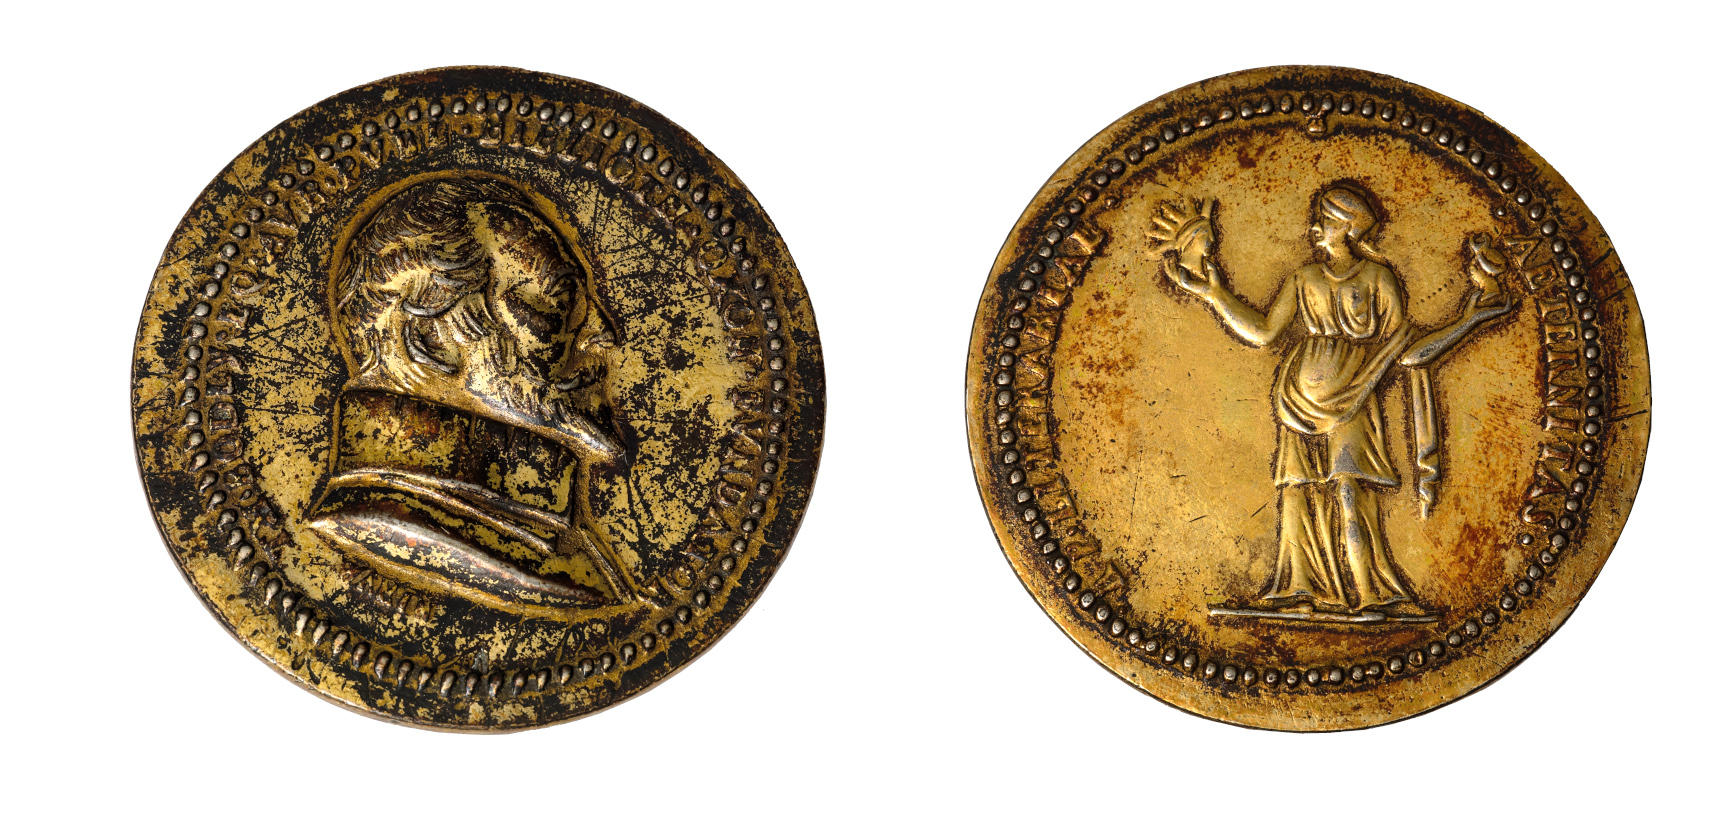 Two faces of a medal: one with an image of a man's face in profile, and the other with a woman holding two busts